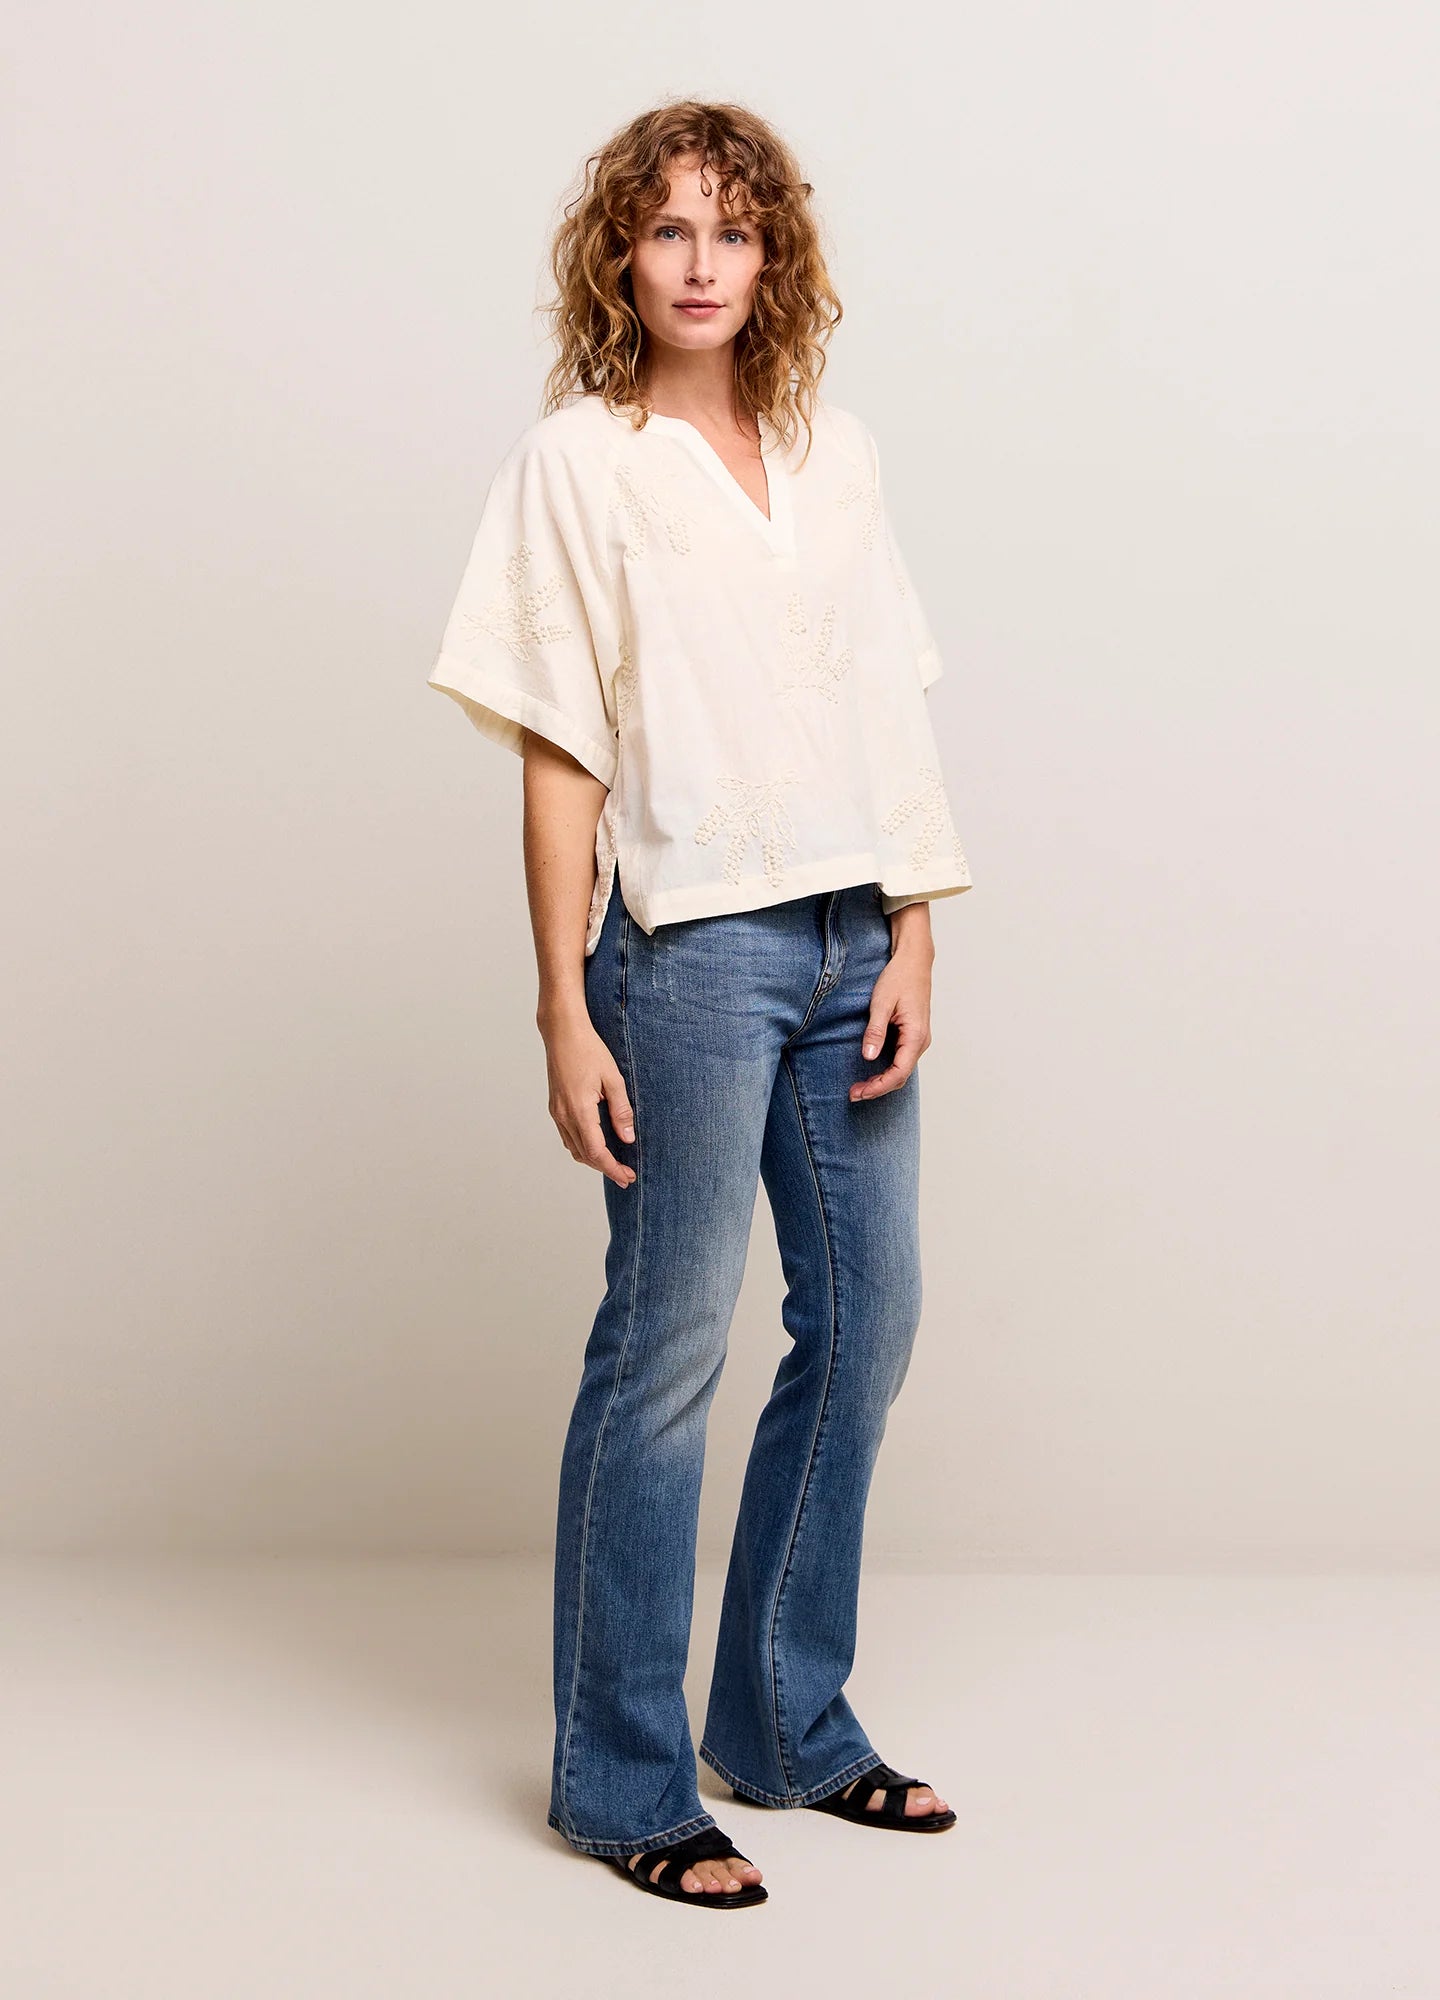 Cotton-Linen Blouse in Ivory